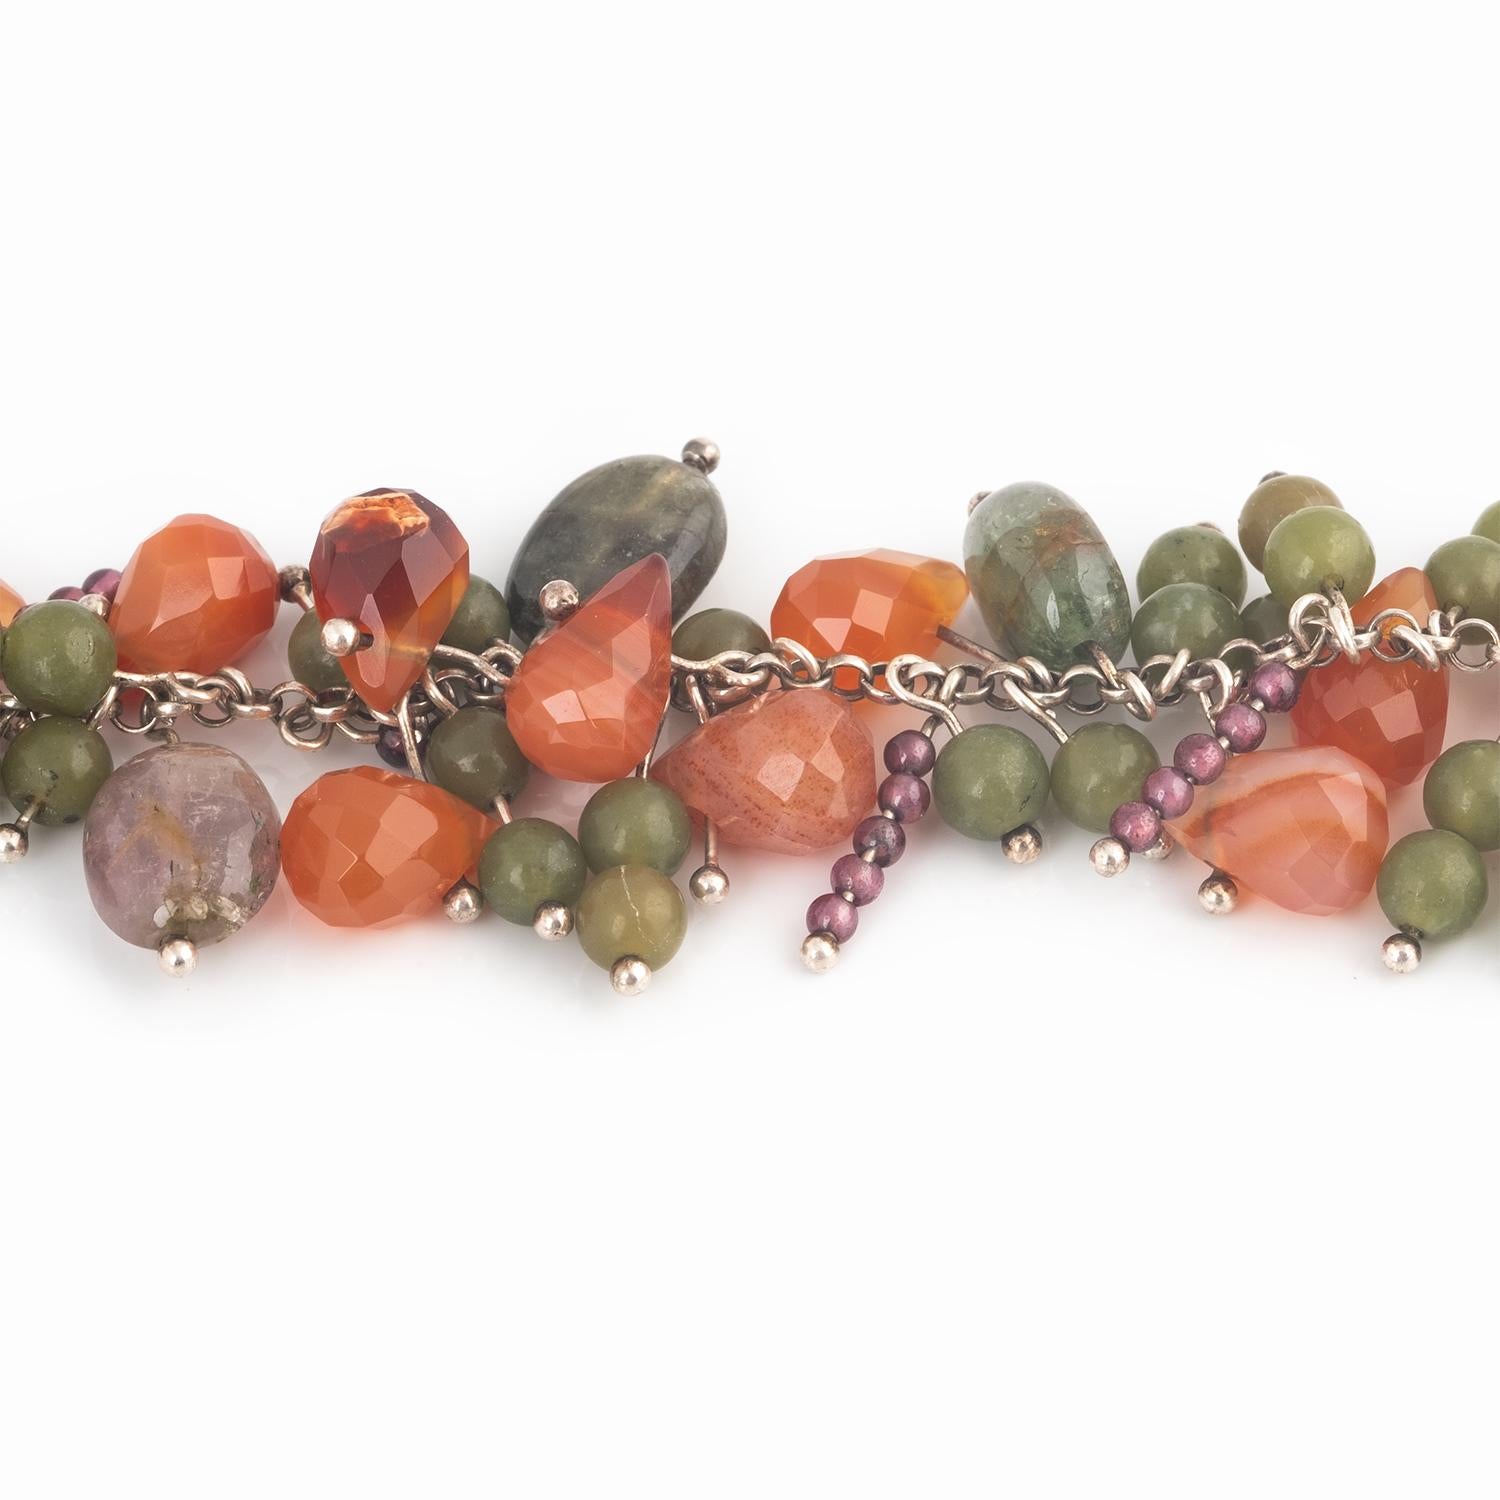 Multi hued gemstones including Tourmaline, Carnelian, Garnet and Apatite are threaded onto sterling silver wire and attached to silver chain with a handmade clasp. A wonderful mix of Fall colors in Oranges, Reds and Greens.
Gemstone beads are mixed